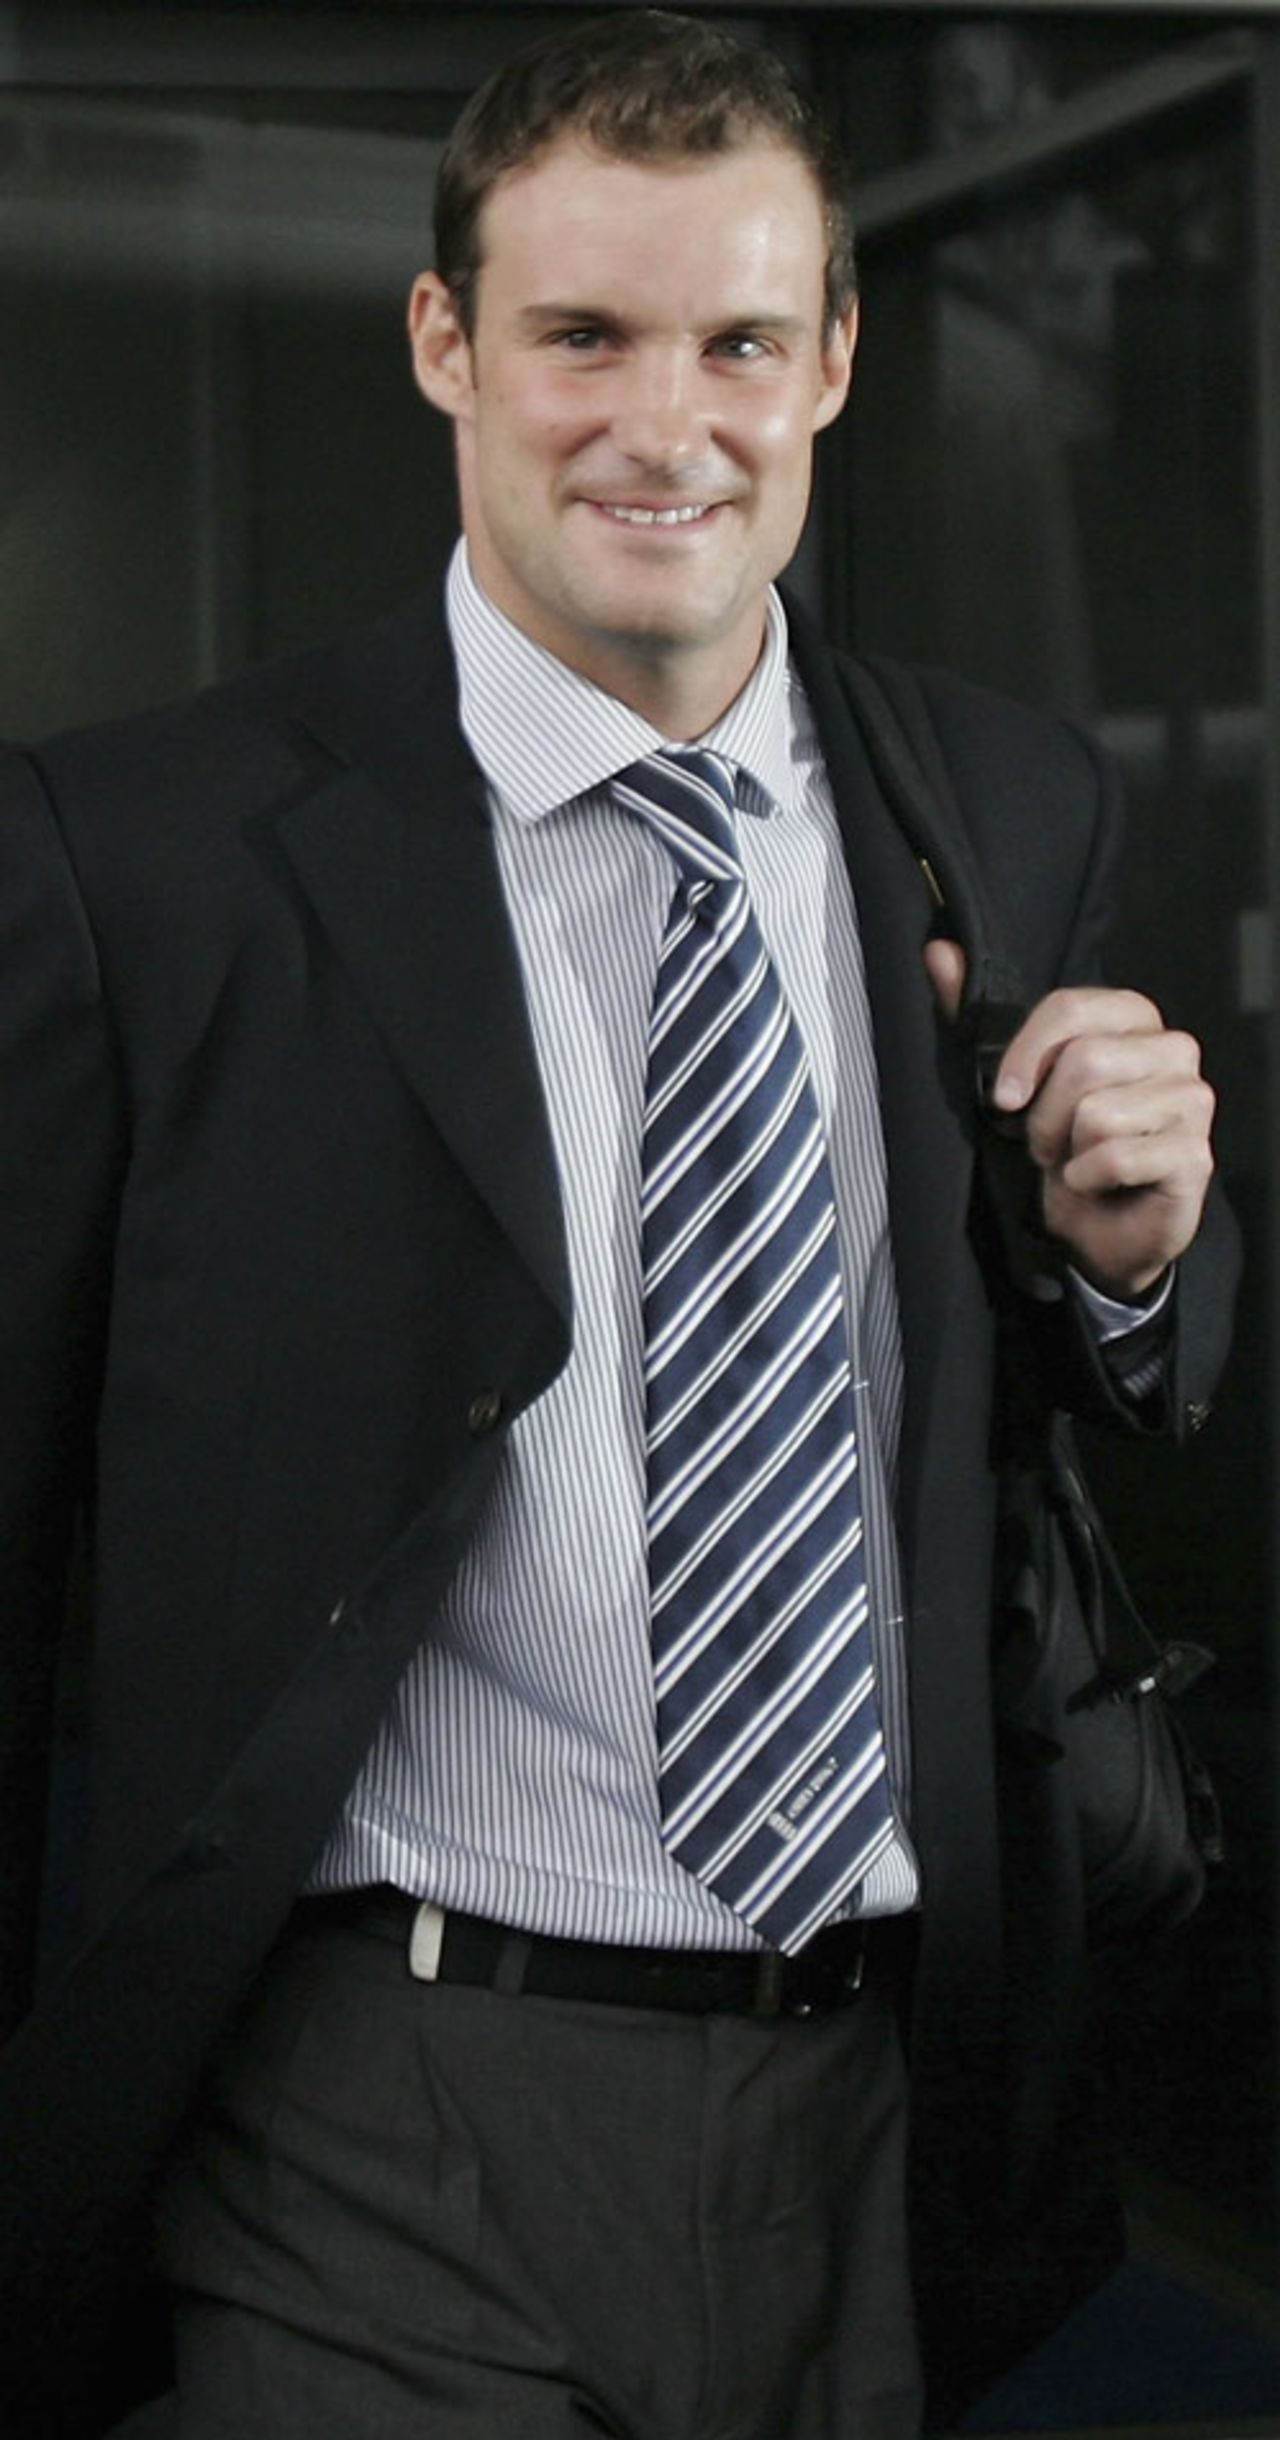 Andrew Strauss smiles to the cameras after arriving in Sydney for England's tour of Australia, Sydney, November 5, 2006